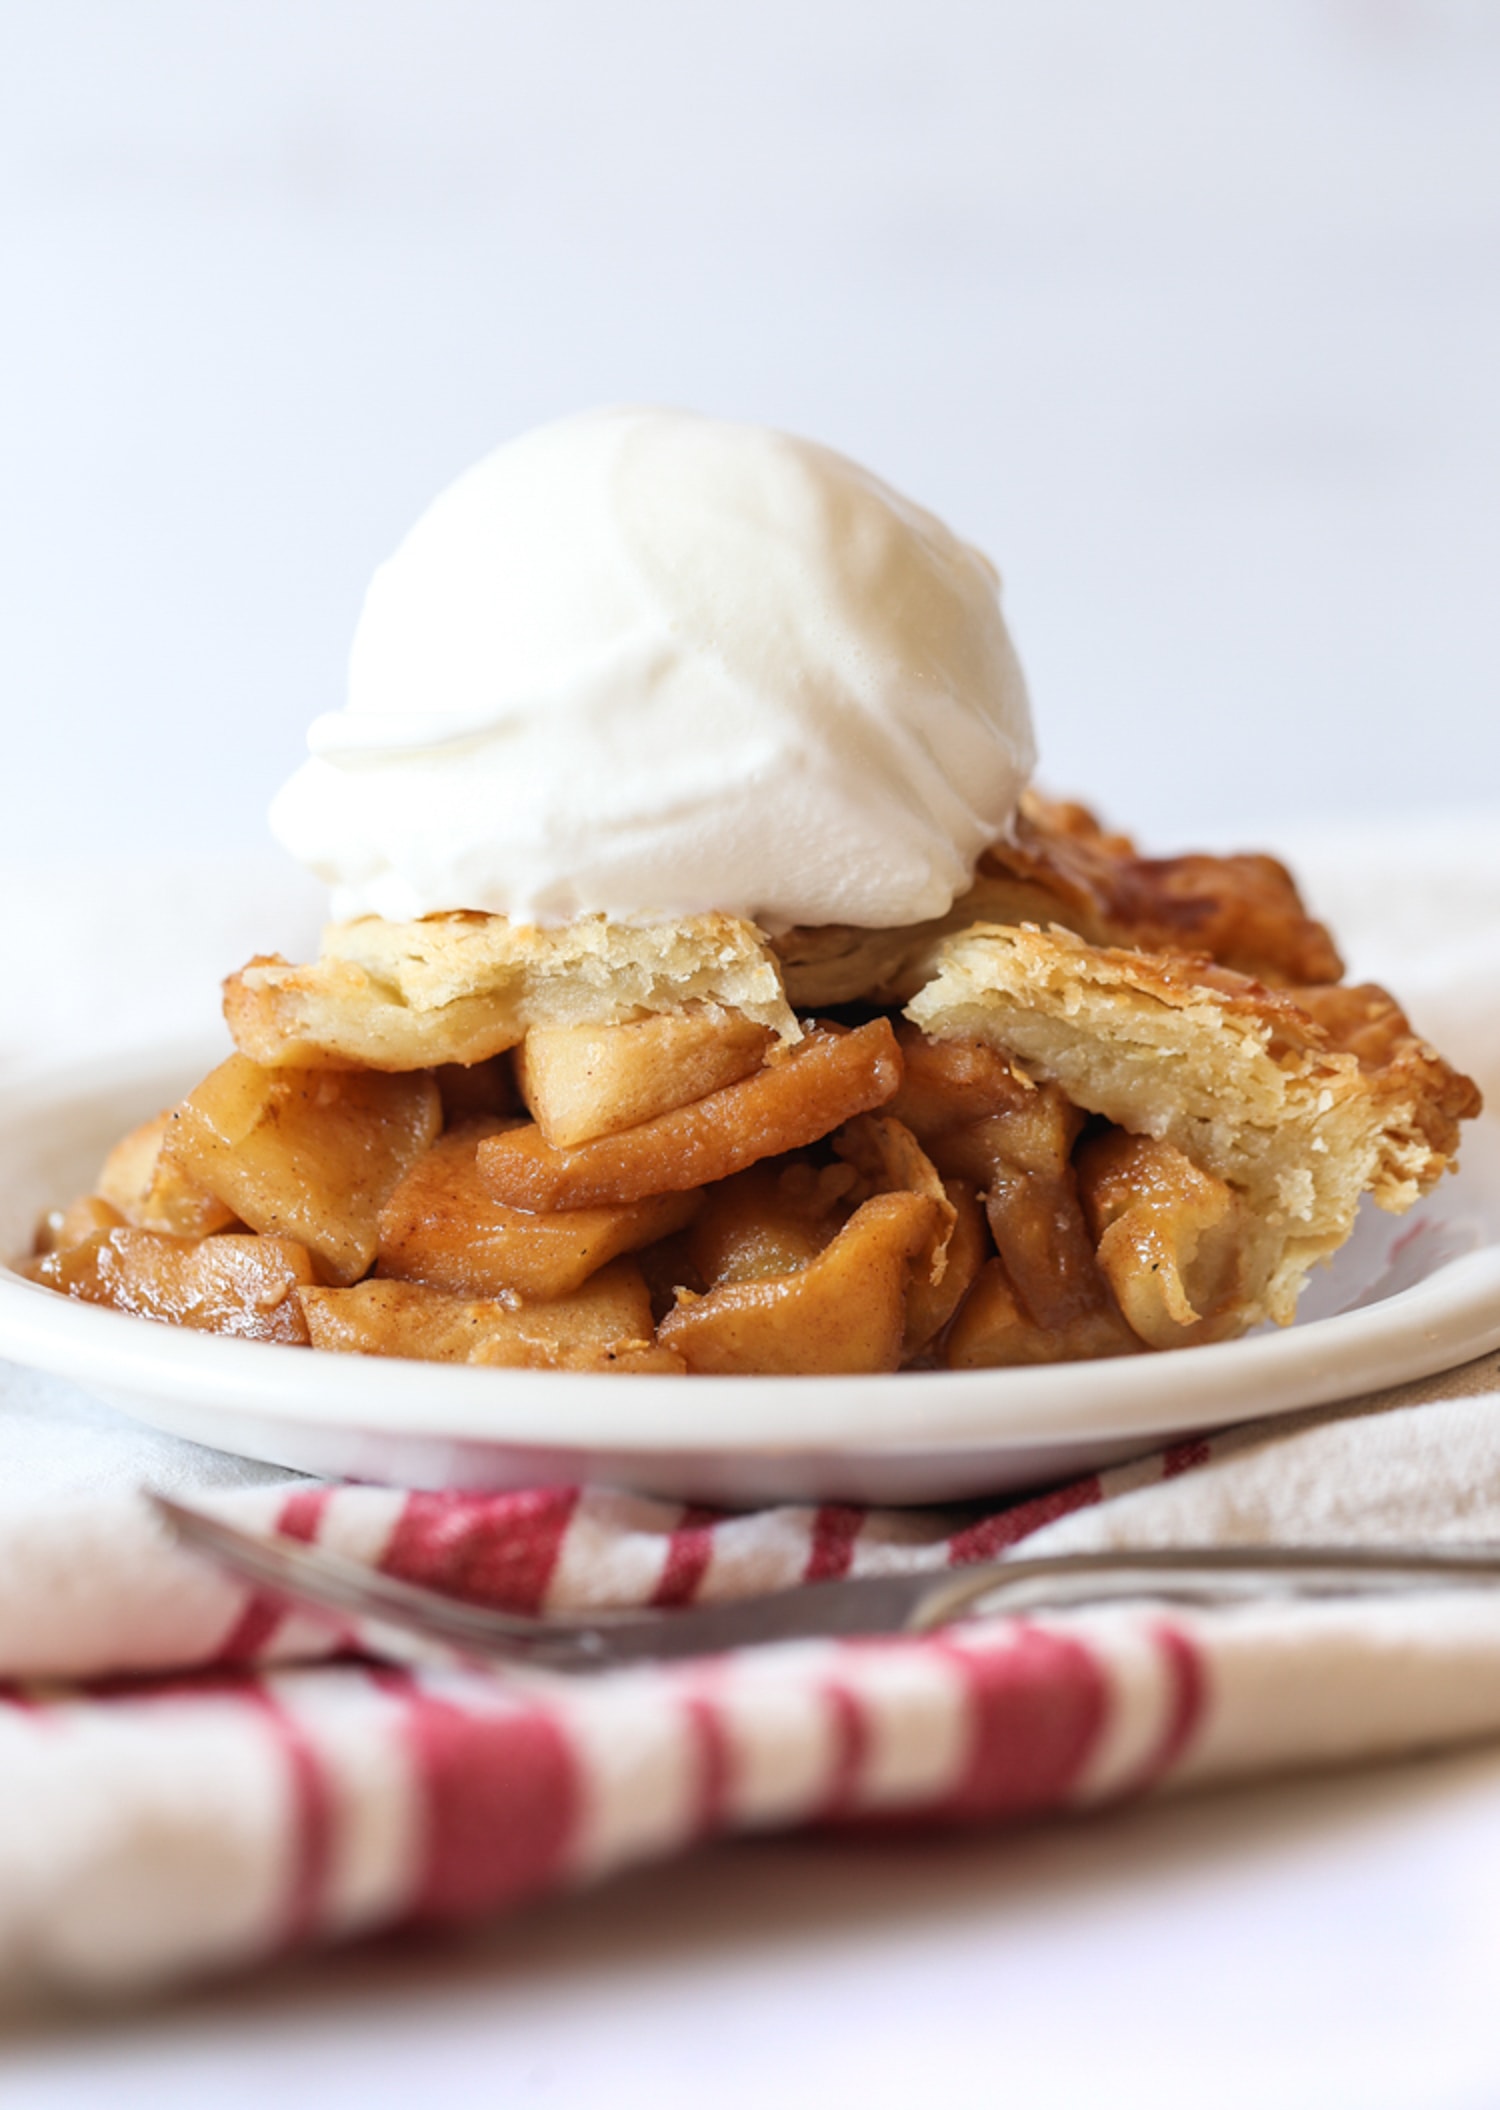 A slice of apple pie on a white plate with a scoop of vanilla ice cream on top